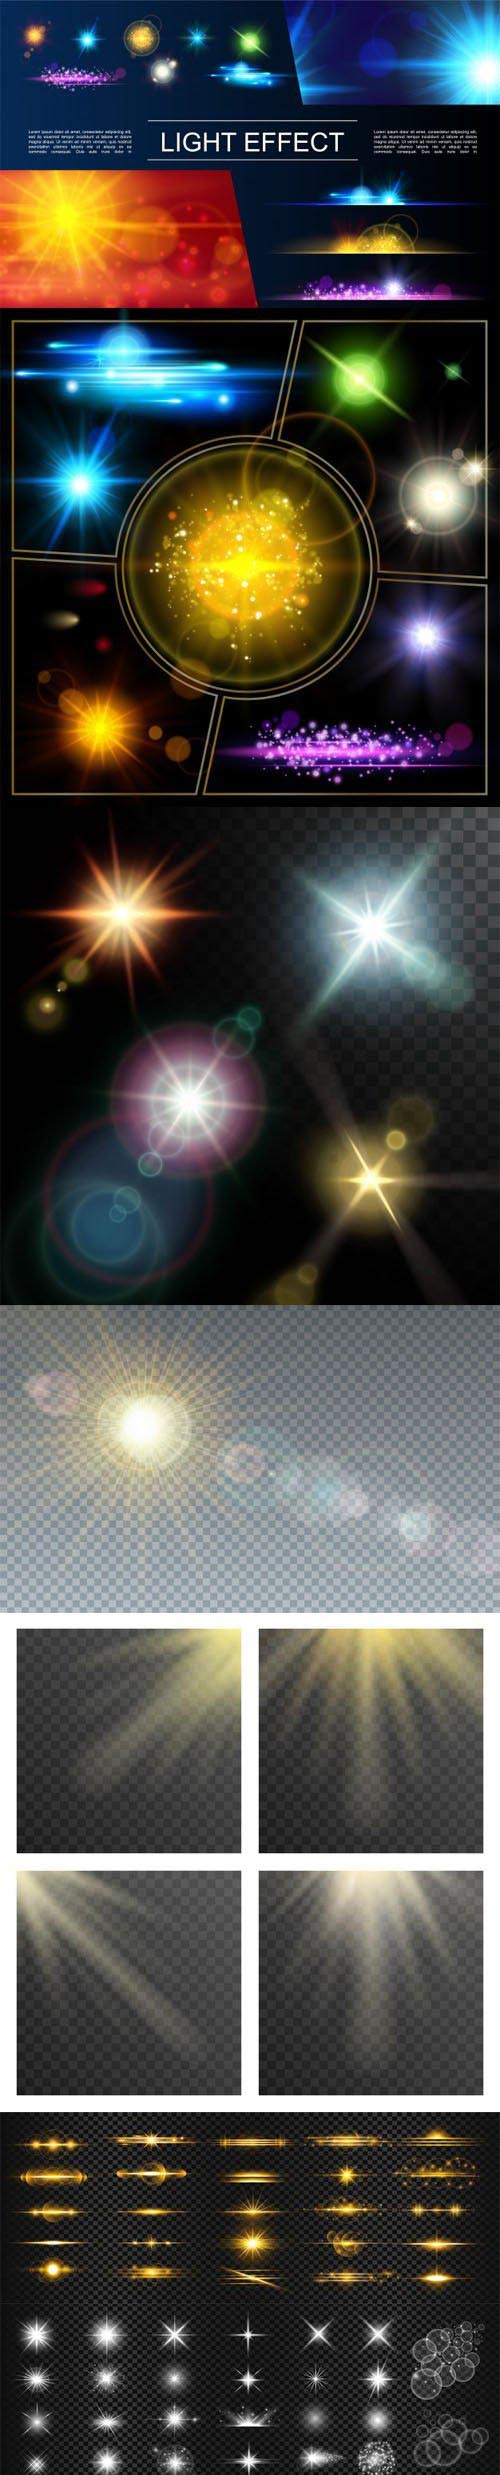 8 Realistic Light Effects Vector Templates